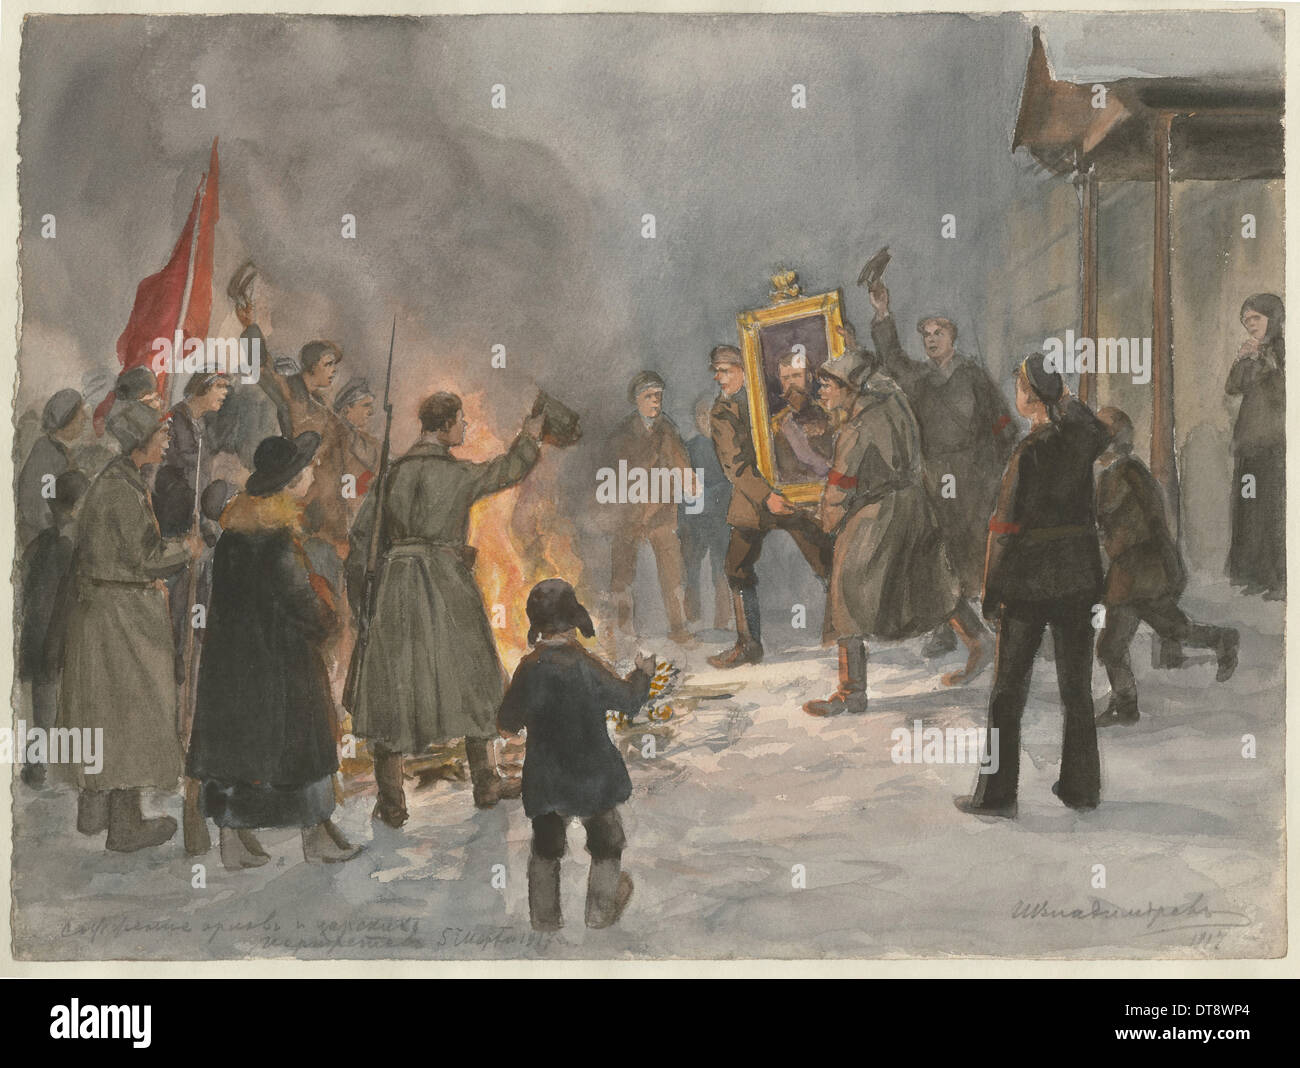 Soldiers burning paintings (from the series of watercolors Russian revolution), 1917. Artist: Vladimirov, Ivan Alexeyevich (1869-1947) Stock Photo